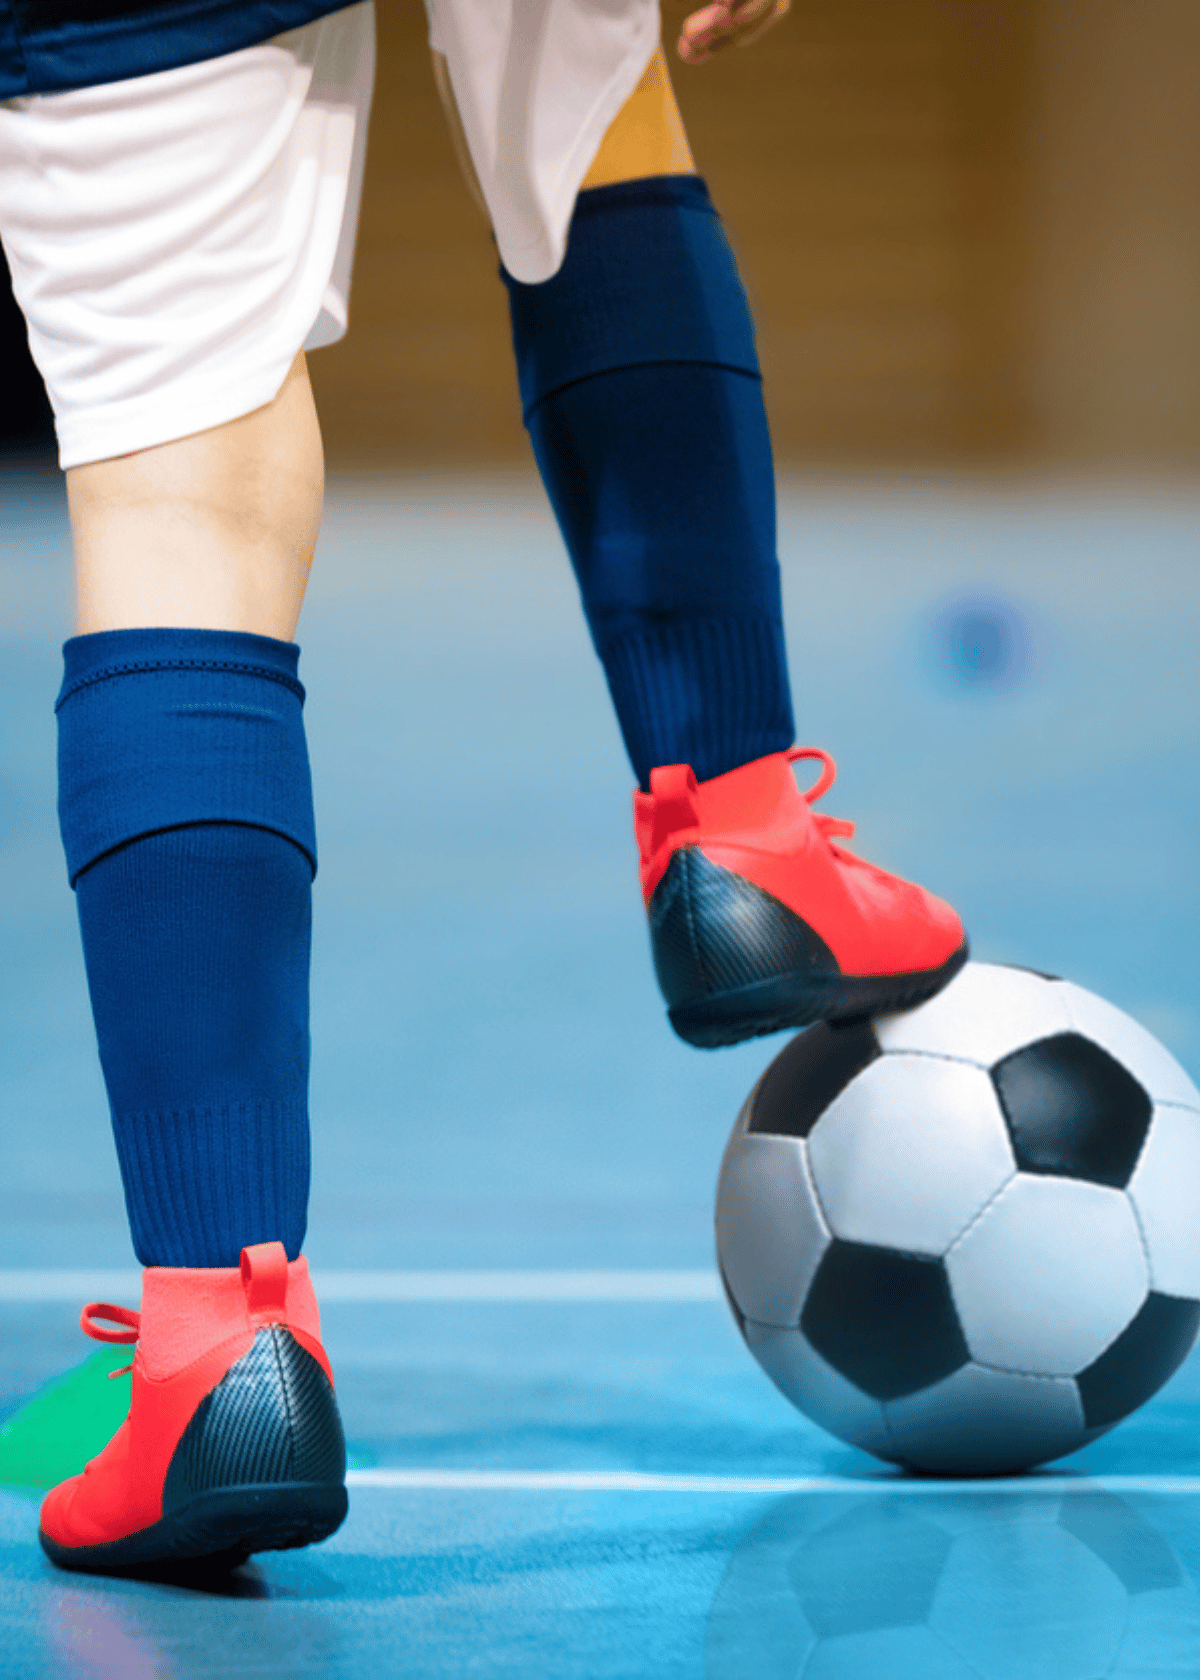 The Best Indoor Soccer Balls for All Ages - Junior to Pro